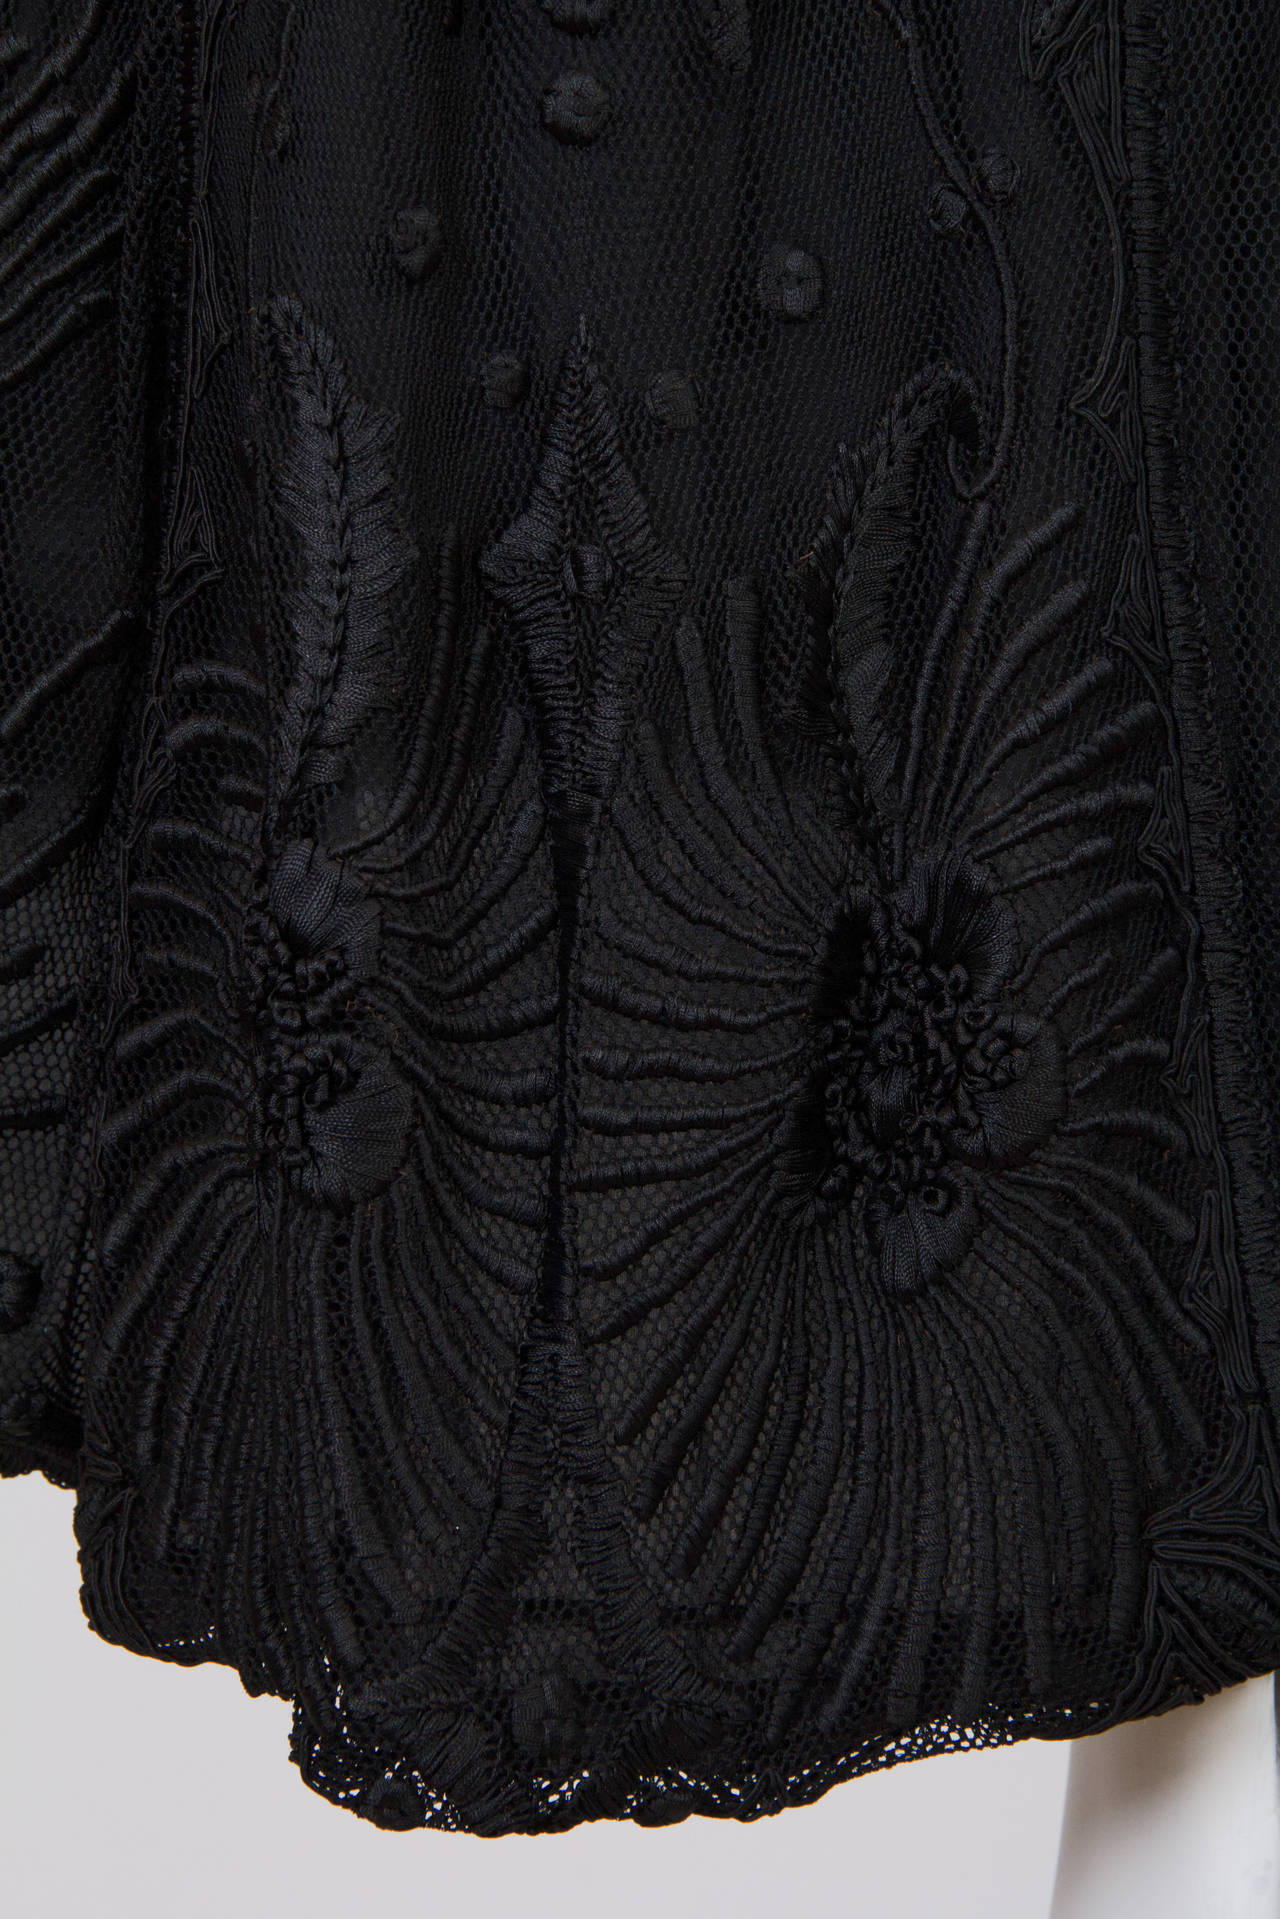 Edwardian Black Hand Embroidered Silk Net Long Duster For Sale 6